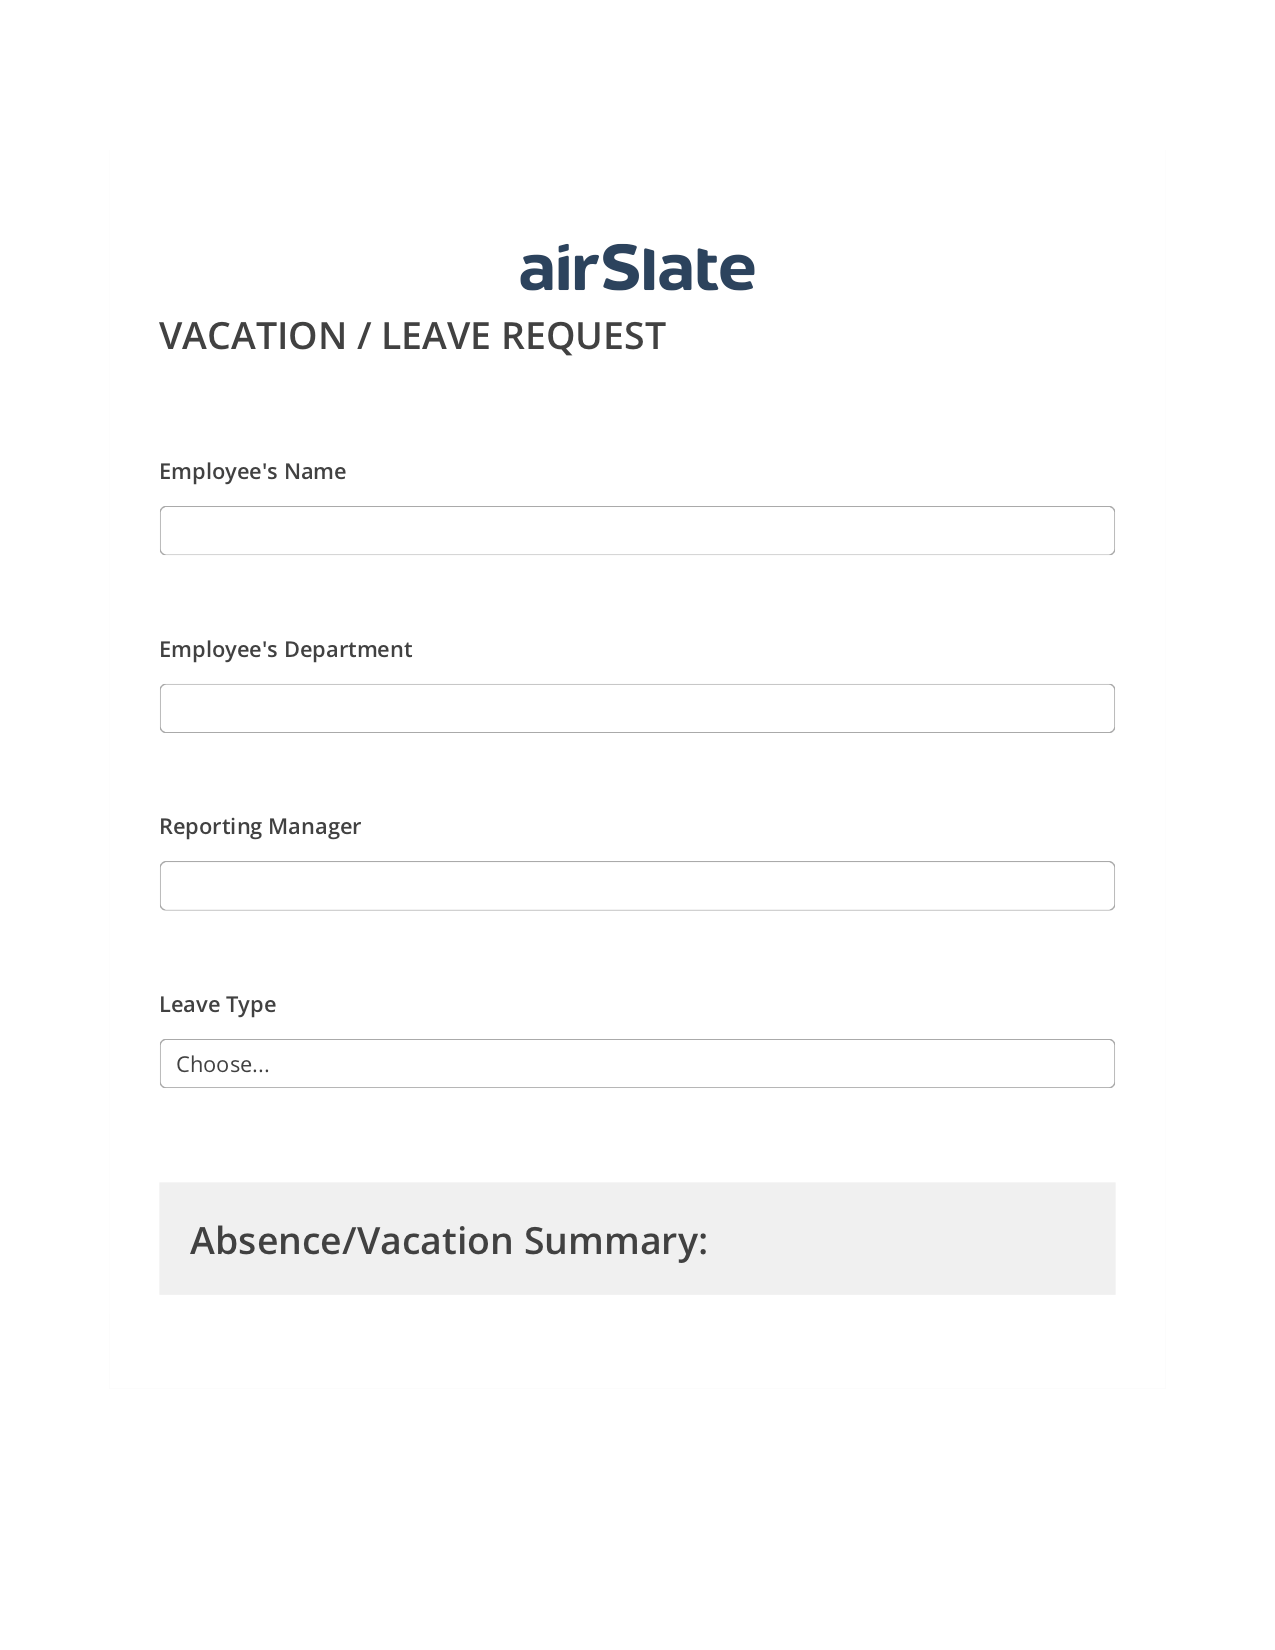 Vacation/Leave Request Workflow Pre-fill from MS Dynamics 365 Records, Send a Slate to MS Dynamics 365 Contact Bot, Archive to OneDrive Bot